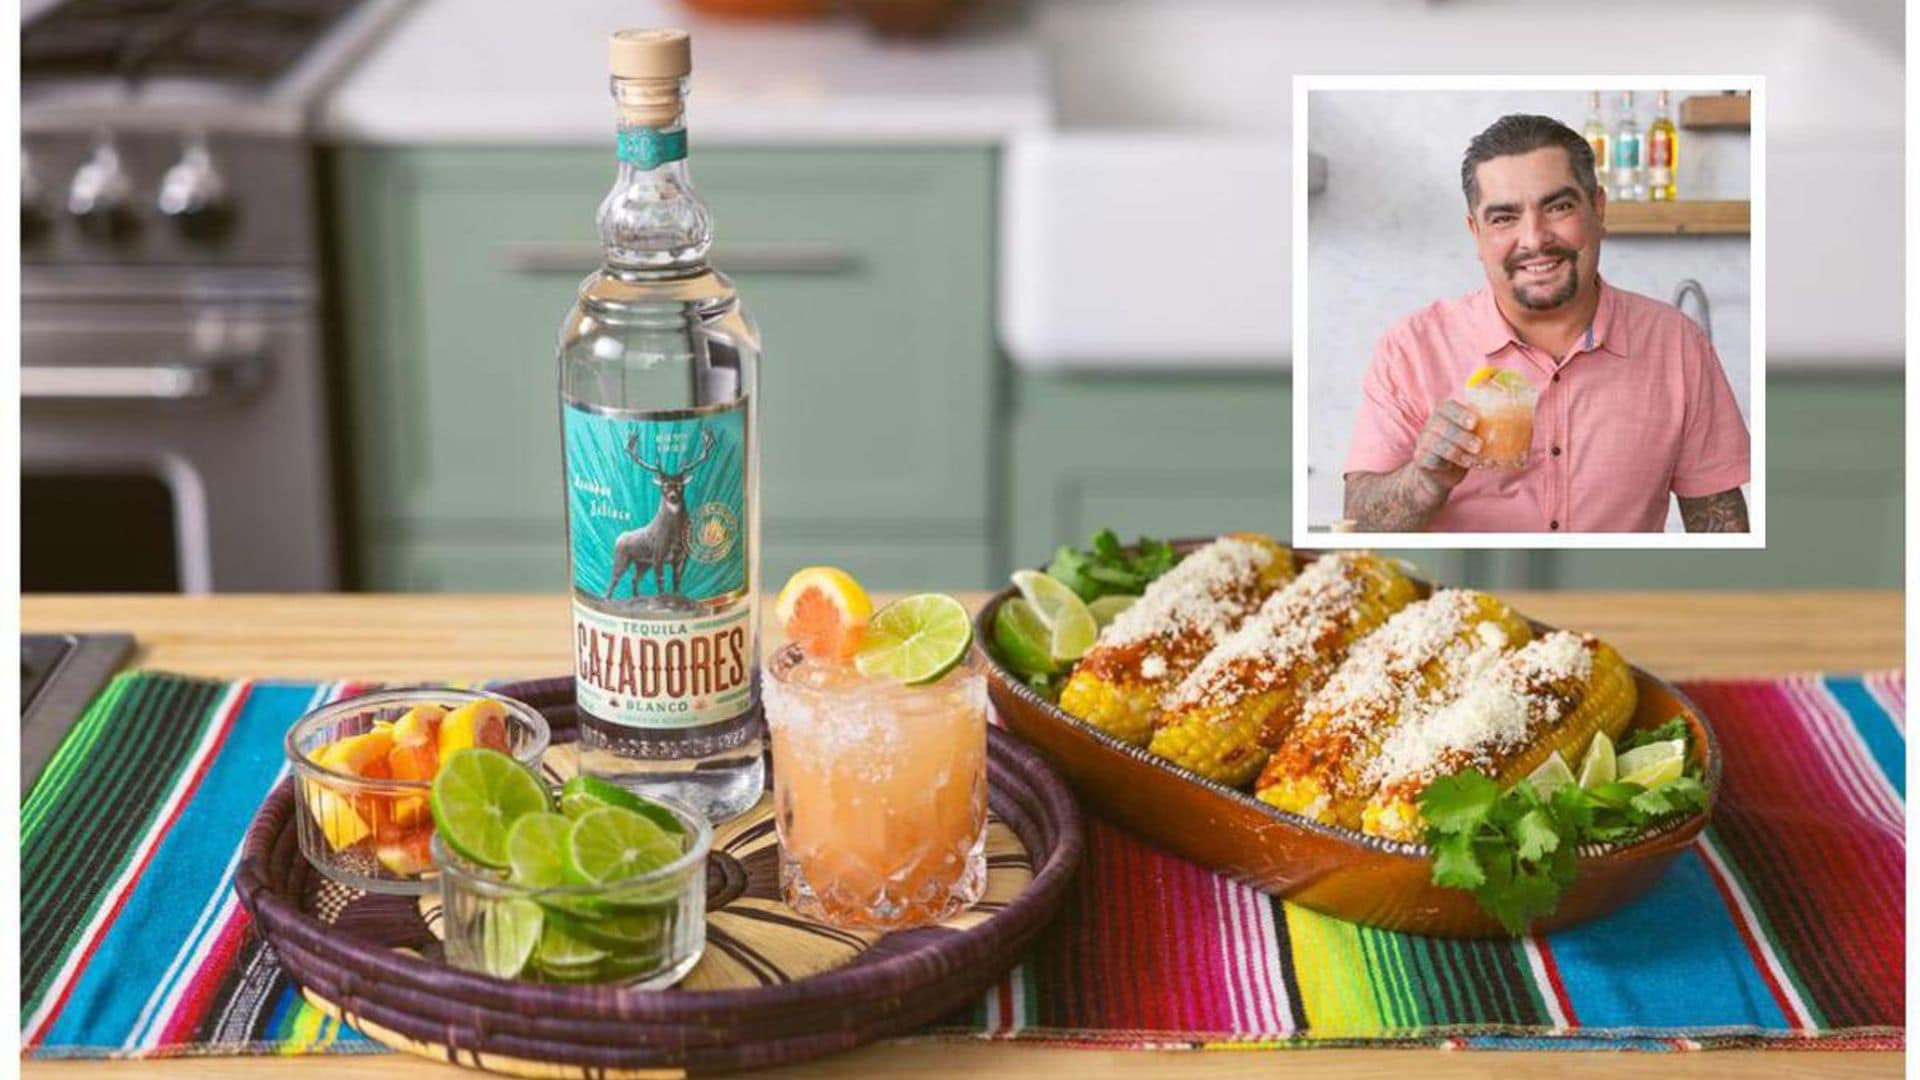 Elotes and margaritas recipes are the perfect pairing, according to Chef Aaron Sanchez